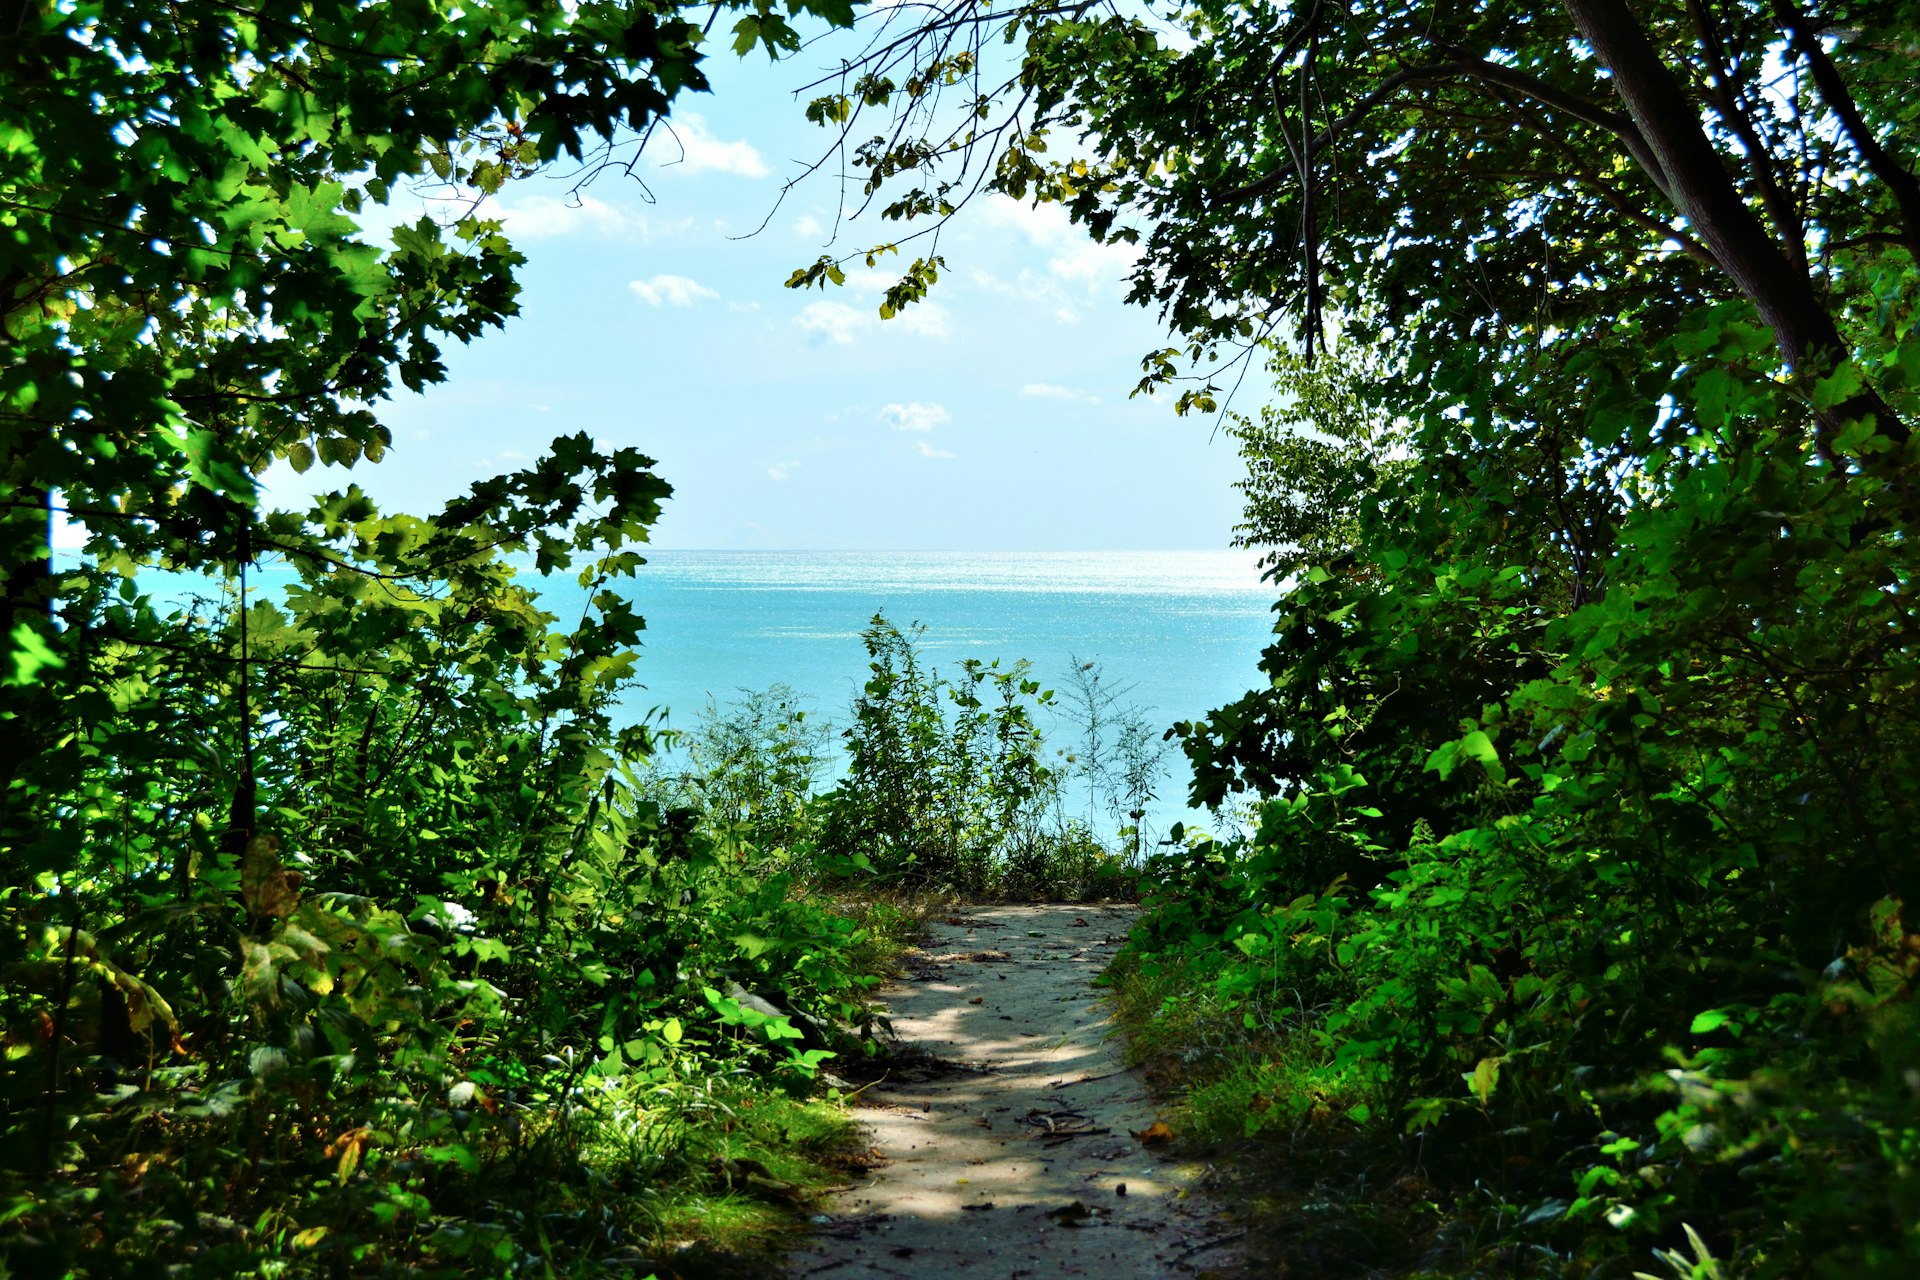 Looking out onto a calm Lake Michigan through a wooded area in Grant Park atop a bluff. The open water if framed by the greenery surrounding the pathway for a spectacular view of the Great Lake